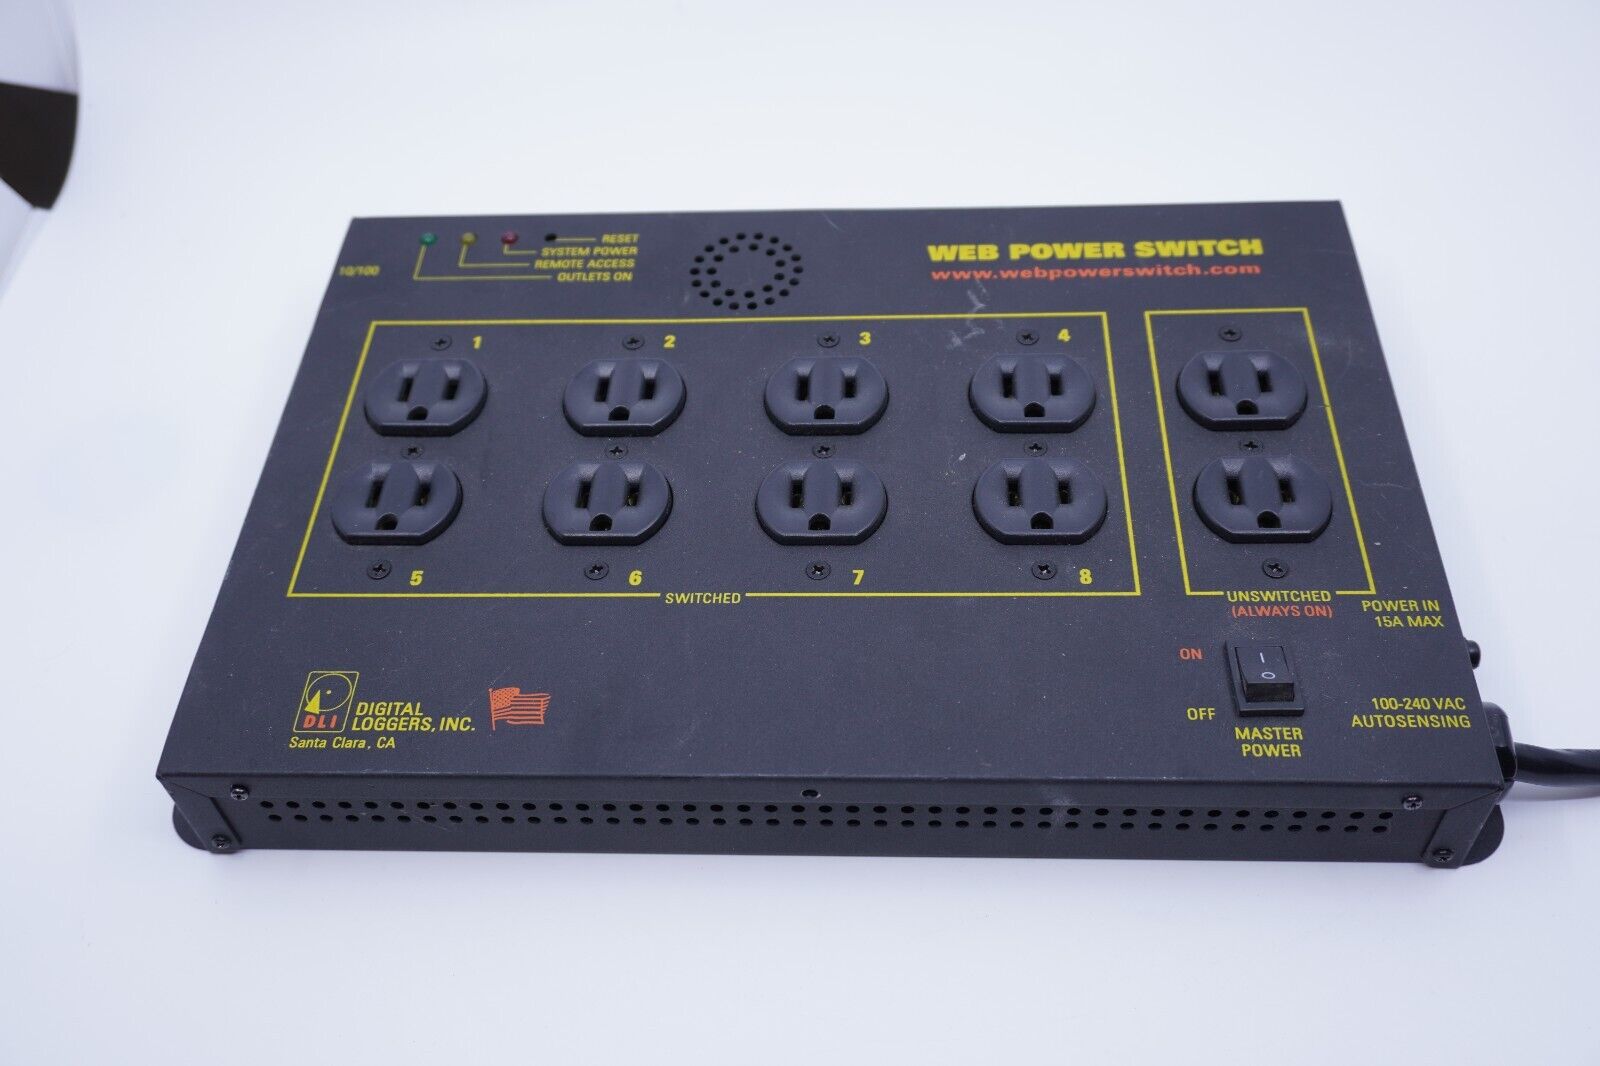 Digital Loggers Web Power Switch (LPC-3) 10 Outlets Tested & Powers Up.